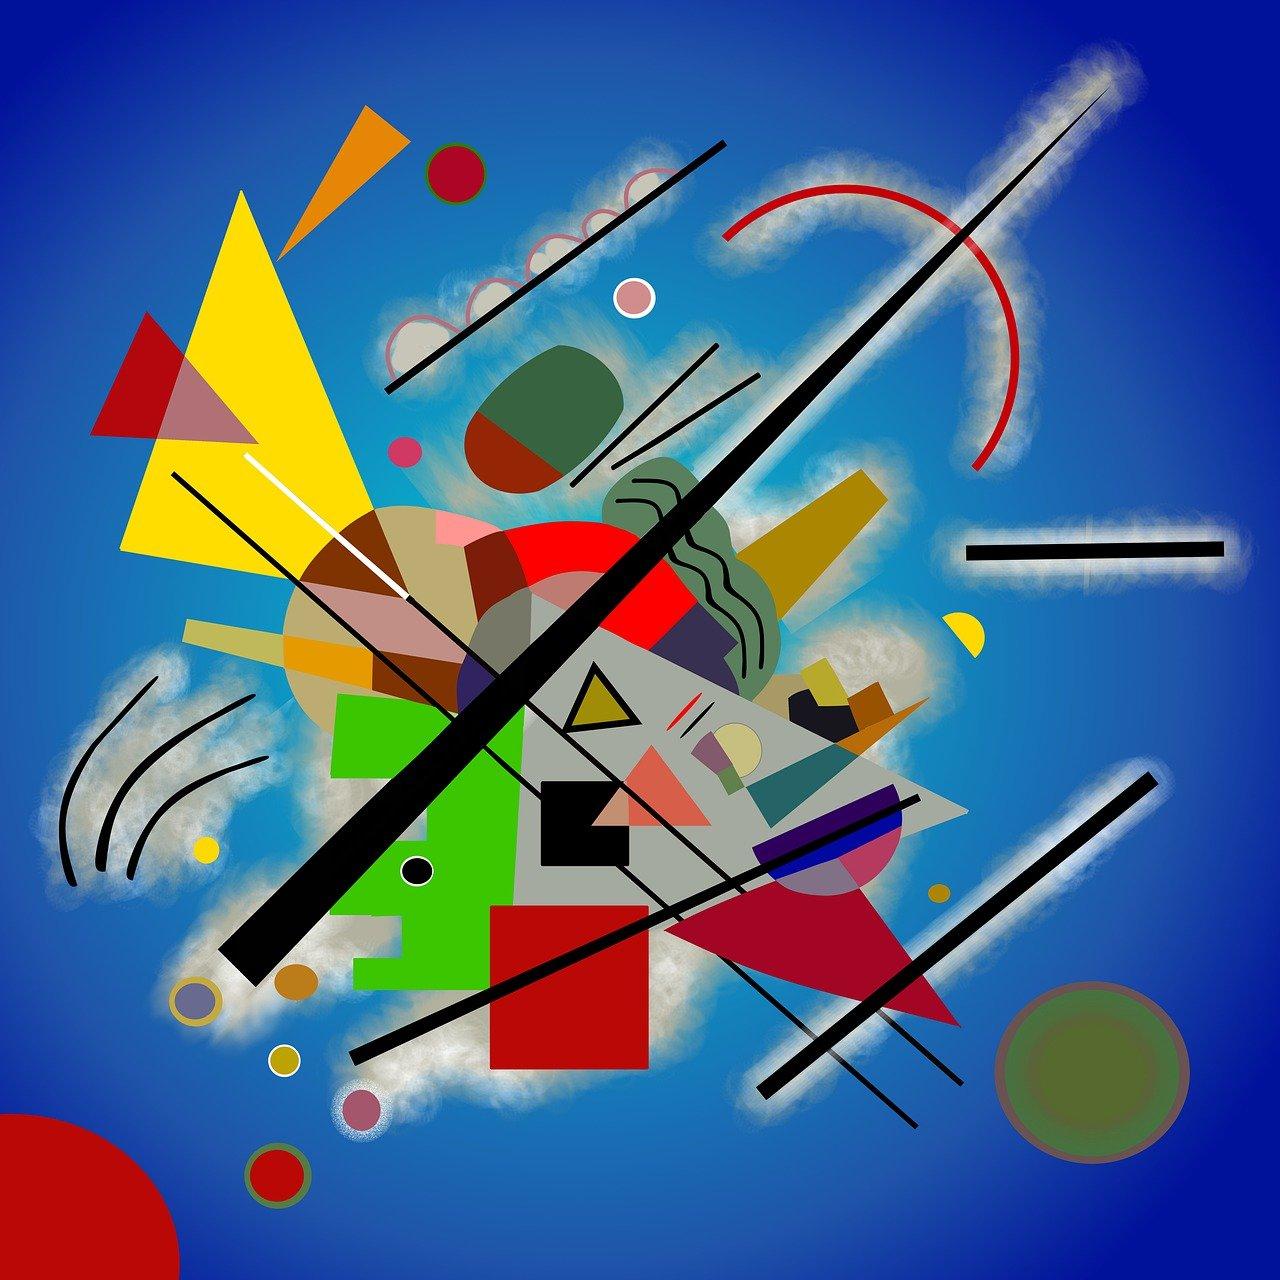 What techniques did Wassily Kandinsky use? 